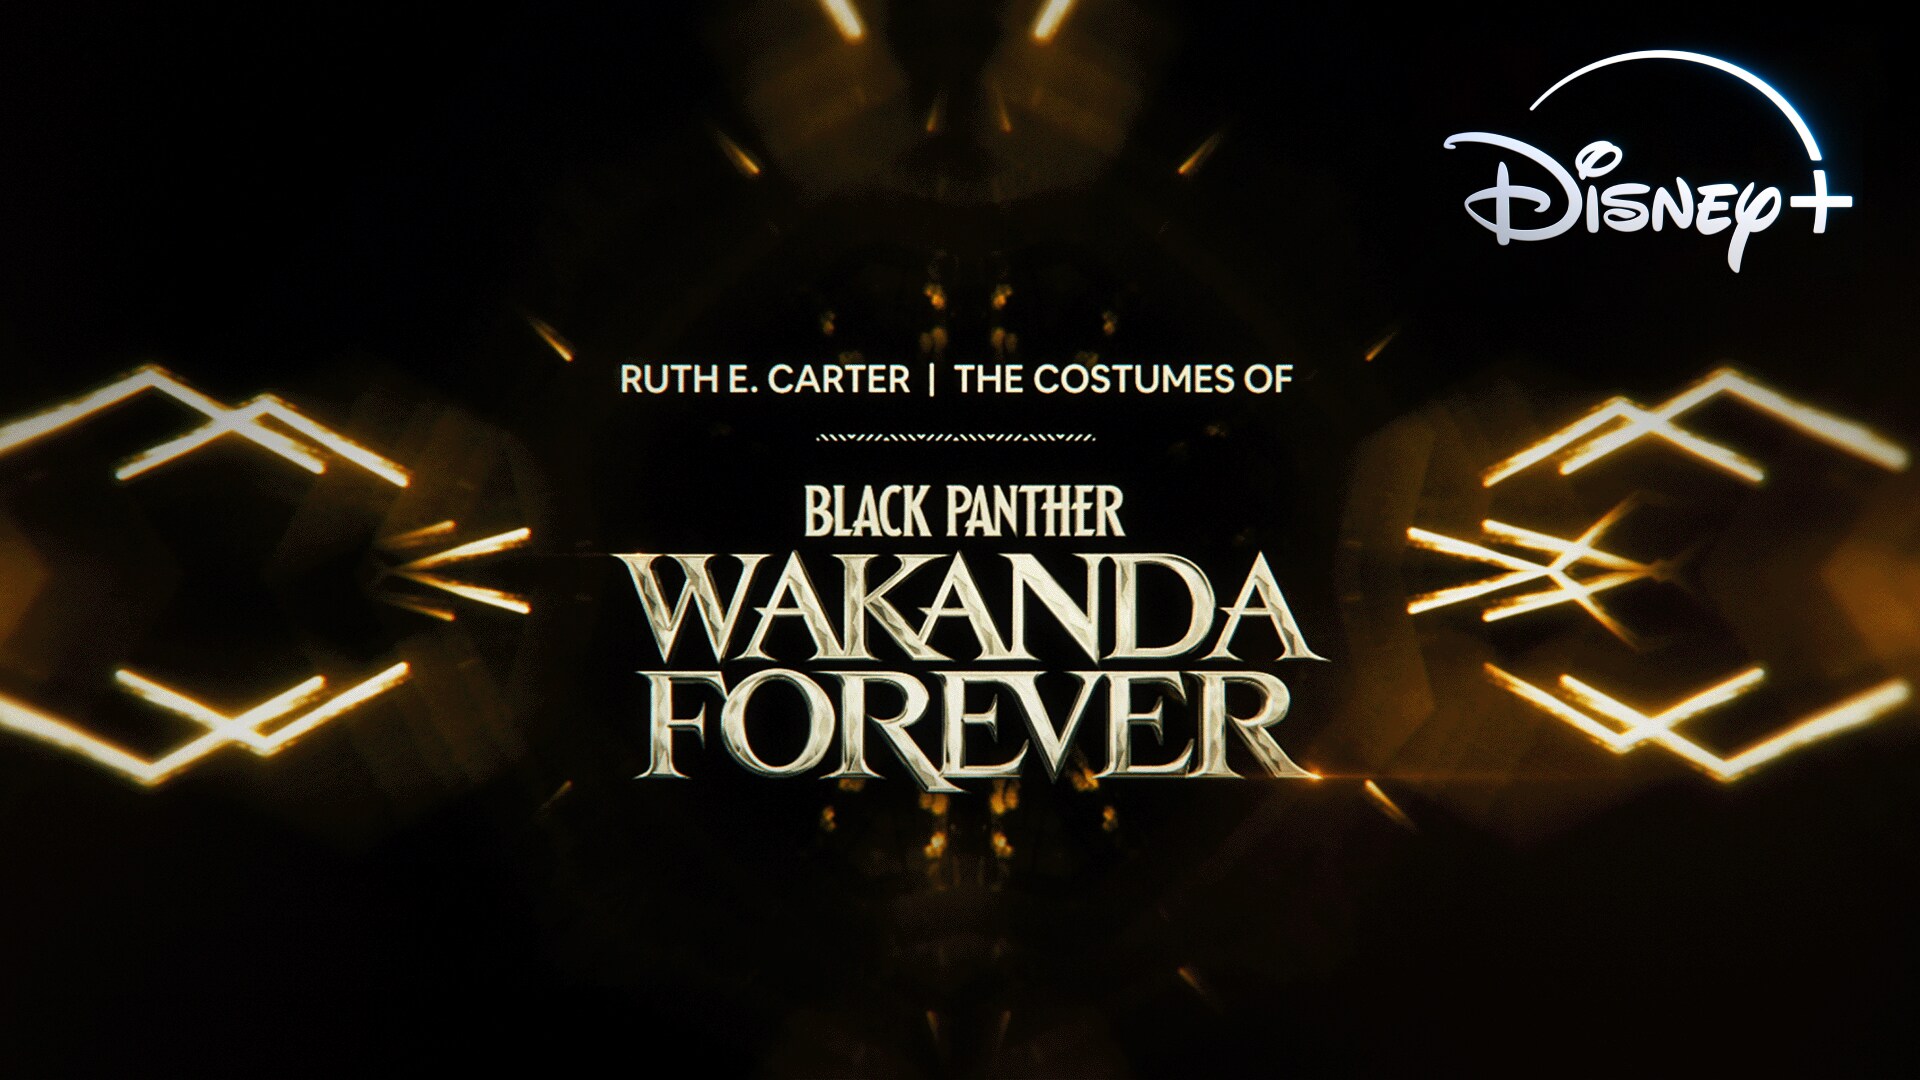 Marvel Studios’ Black Panther: Wakanda Forever | Ruth E. Carter Behind the Scenes